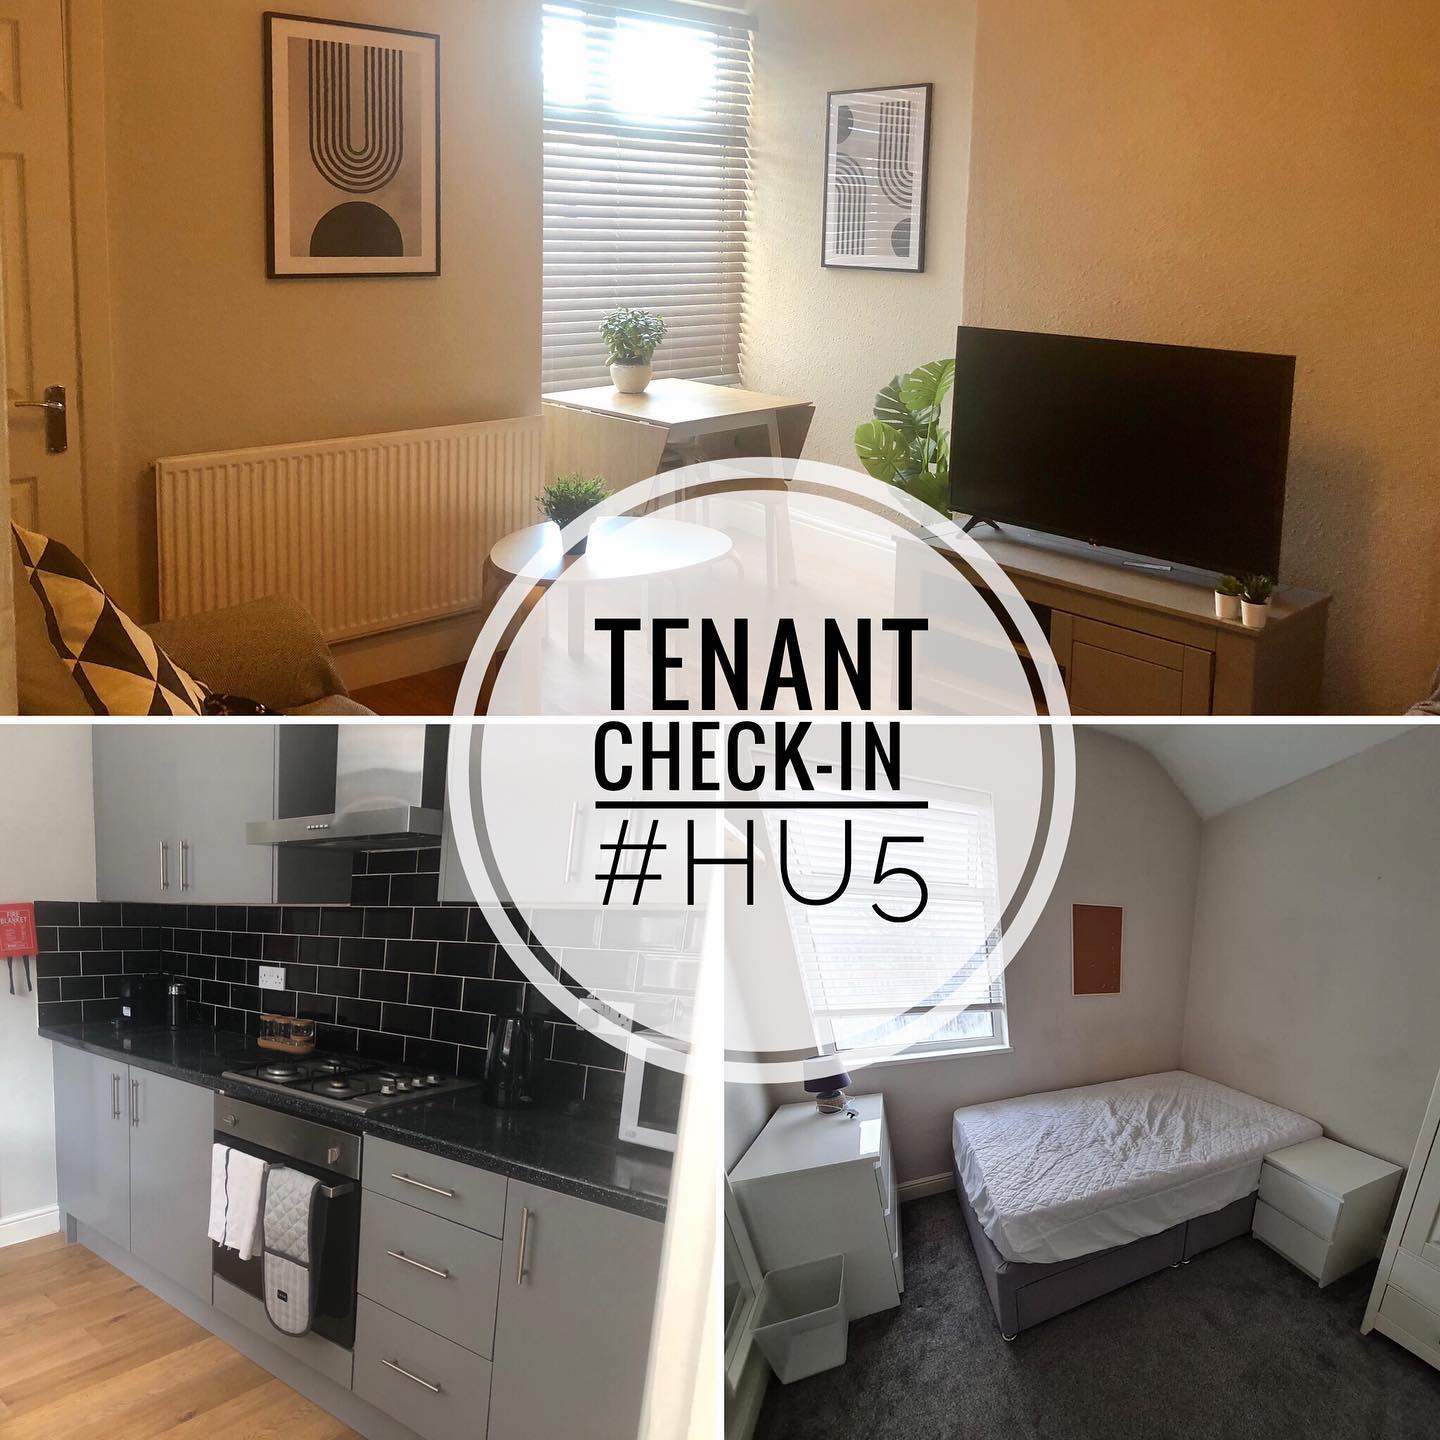 Weekend check in done.. and this house is now full! BUT we’ve got other similar houses with rooms available, so get in touch for viewings! #hu5 #hull #professionalhouseshare #housetorent #propertymanagement